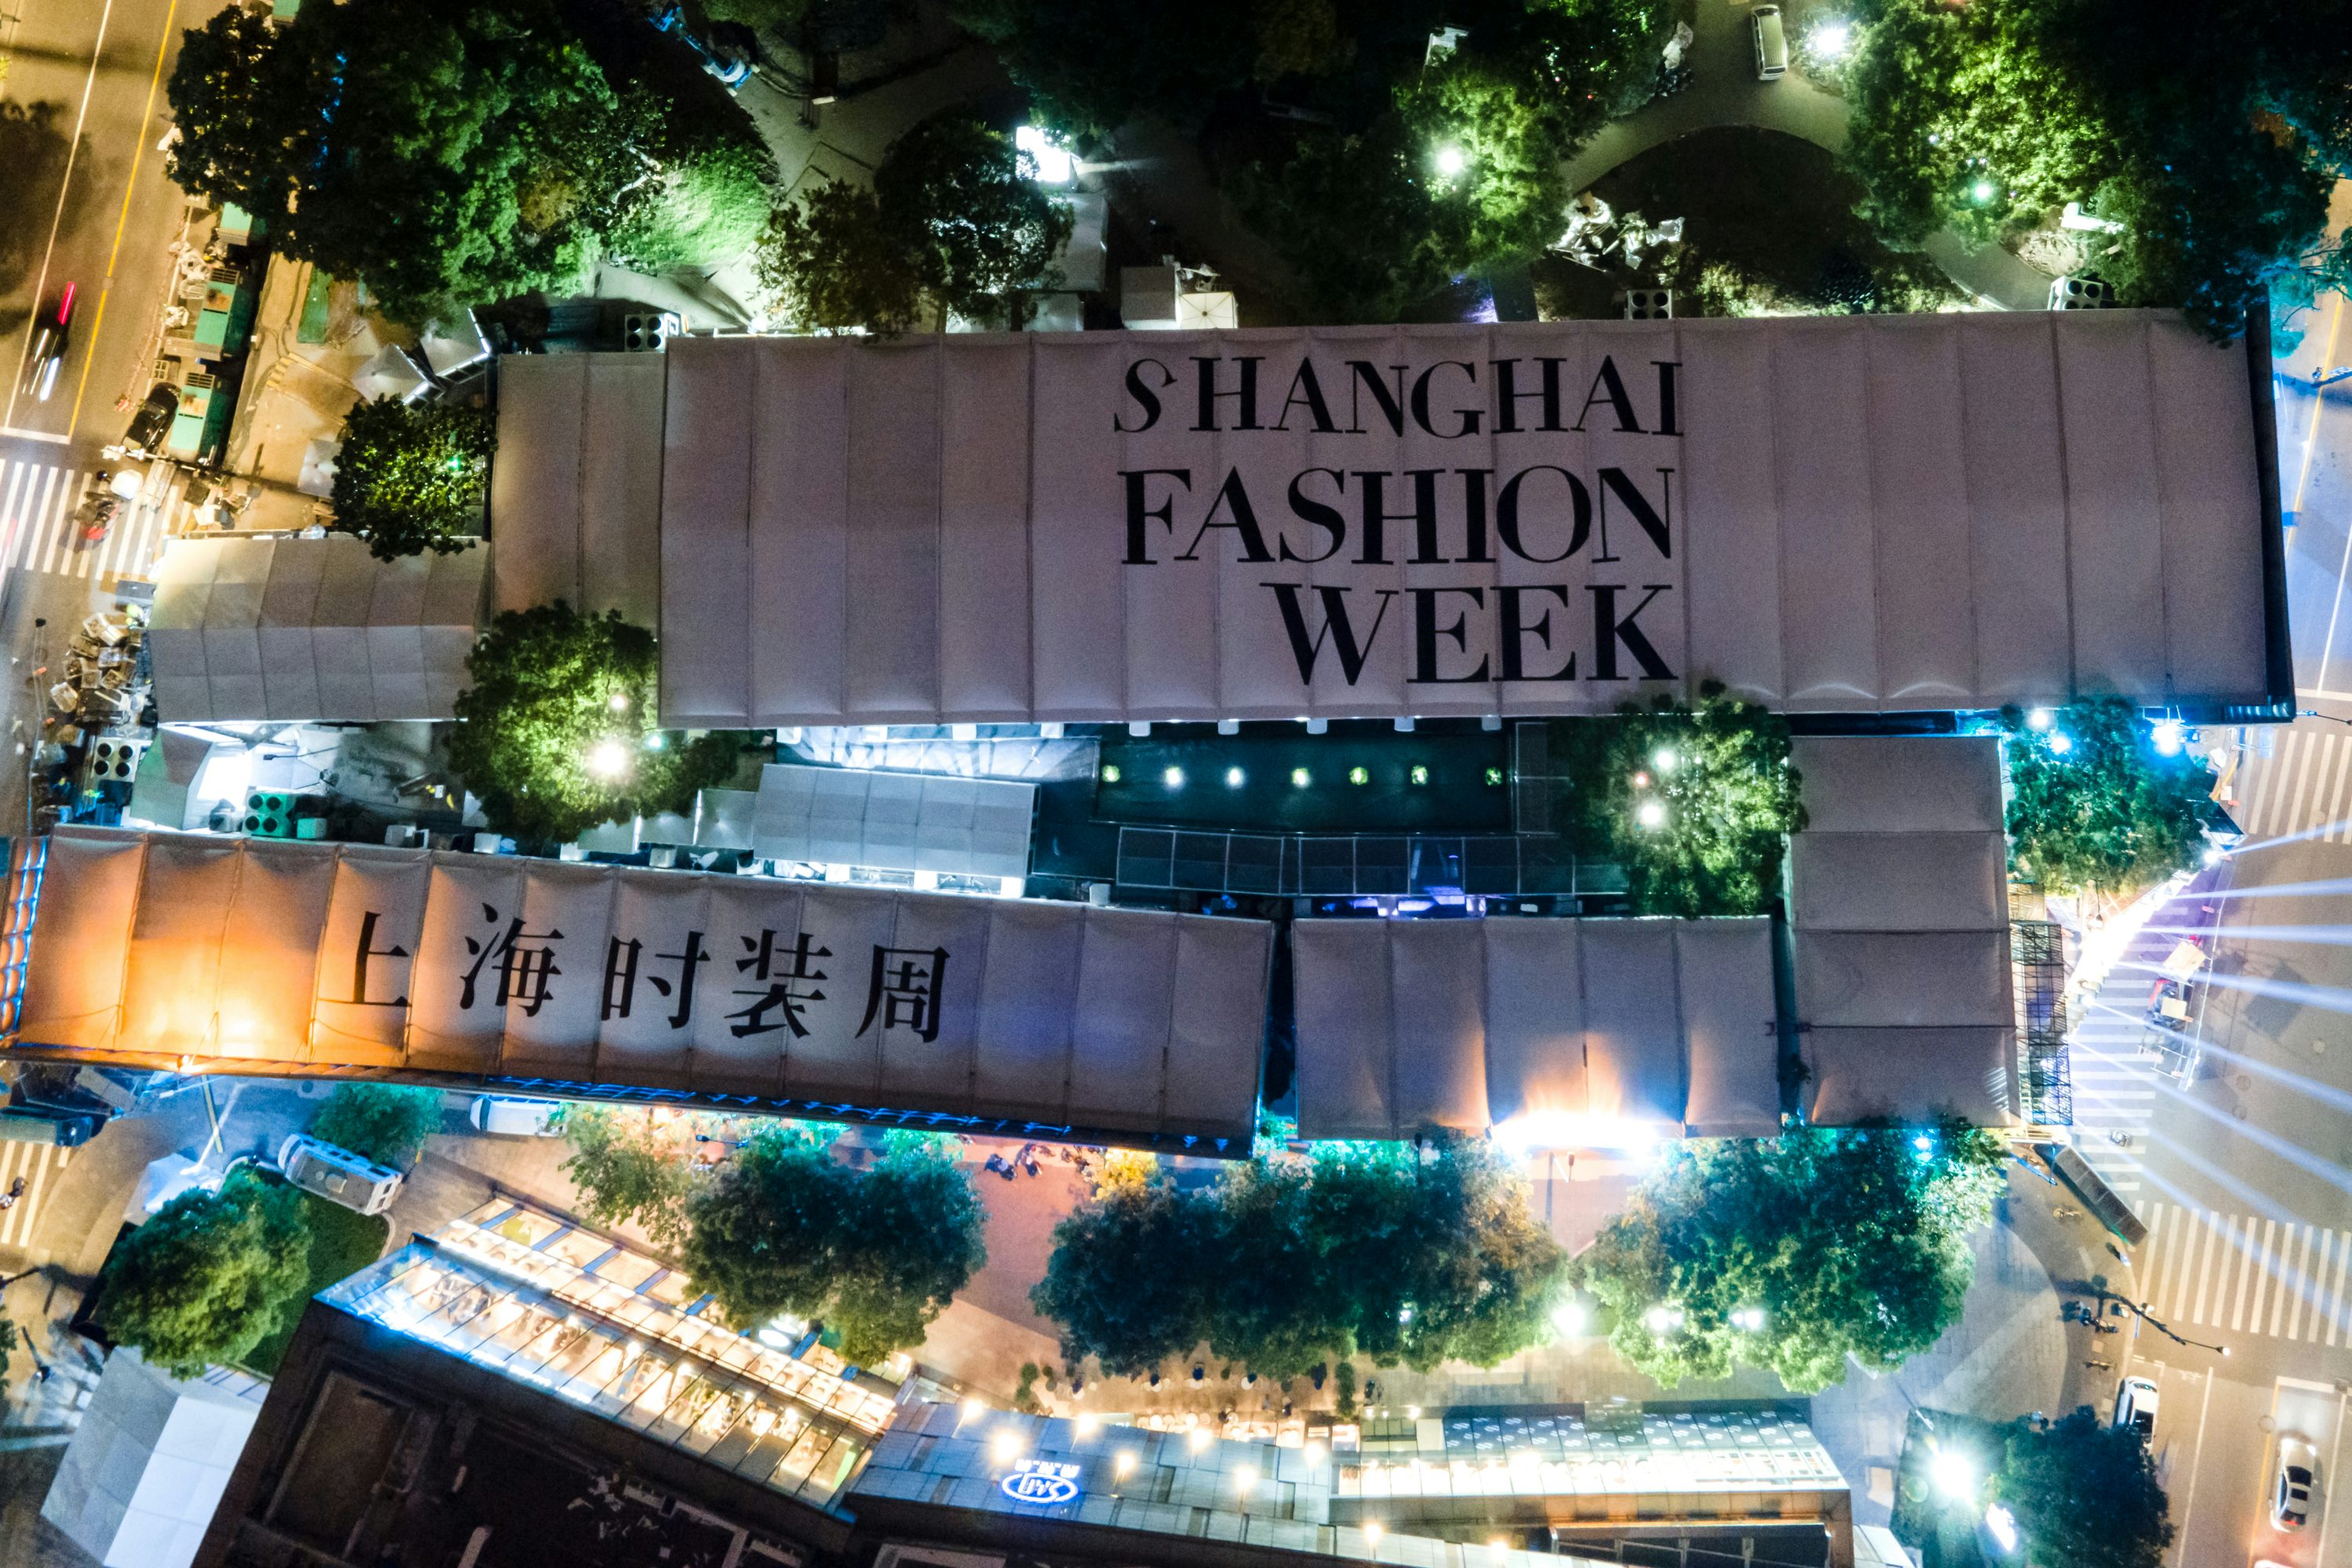 The Shanghai Fashion Week event spaces from above. Shanghai Fashion Week.